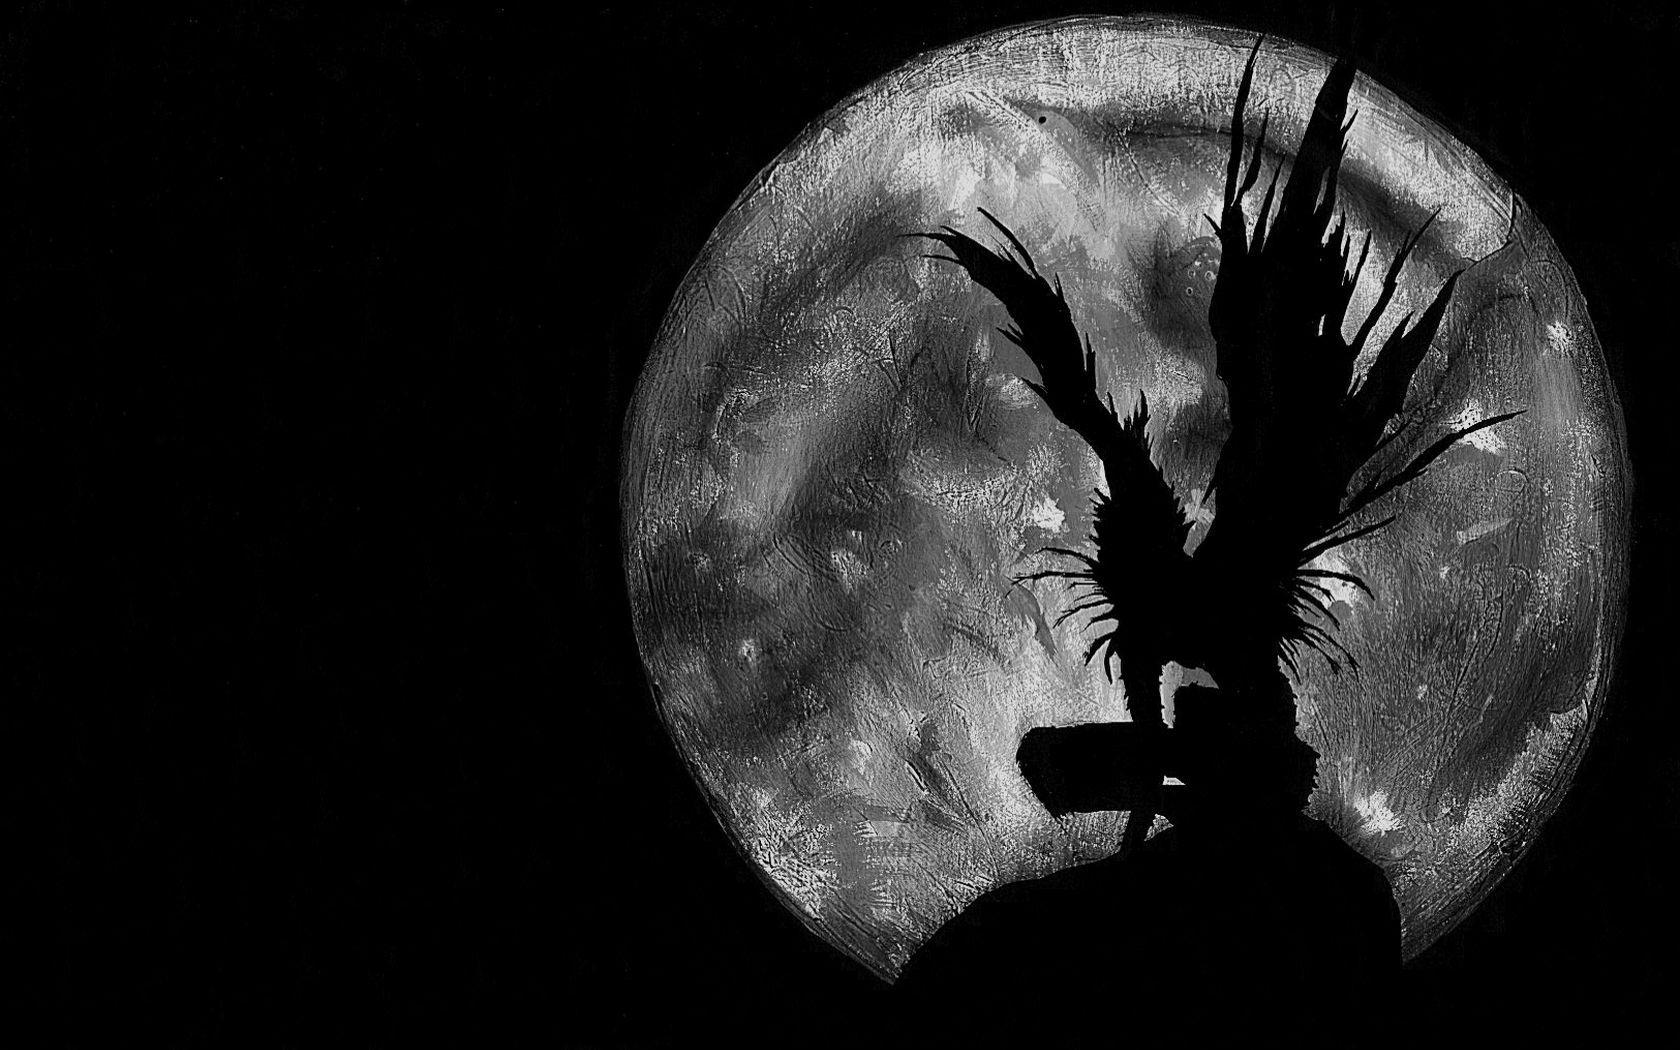 Death Note Ryuk Wallpapers Top Free Death Note Ryuk Backgrounds Wallpaperaccess View and download this 850x1265 ryuk image with 15 favorites, or death note kira ipod / iphone wallpaper by donkoopa on deviantart. death note ryuk wallpapers top free